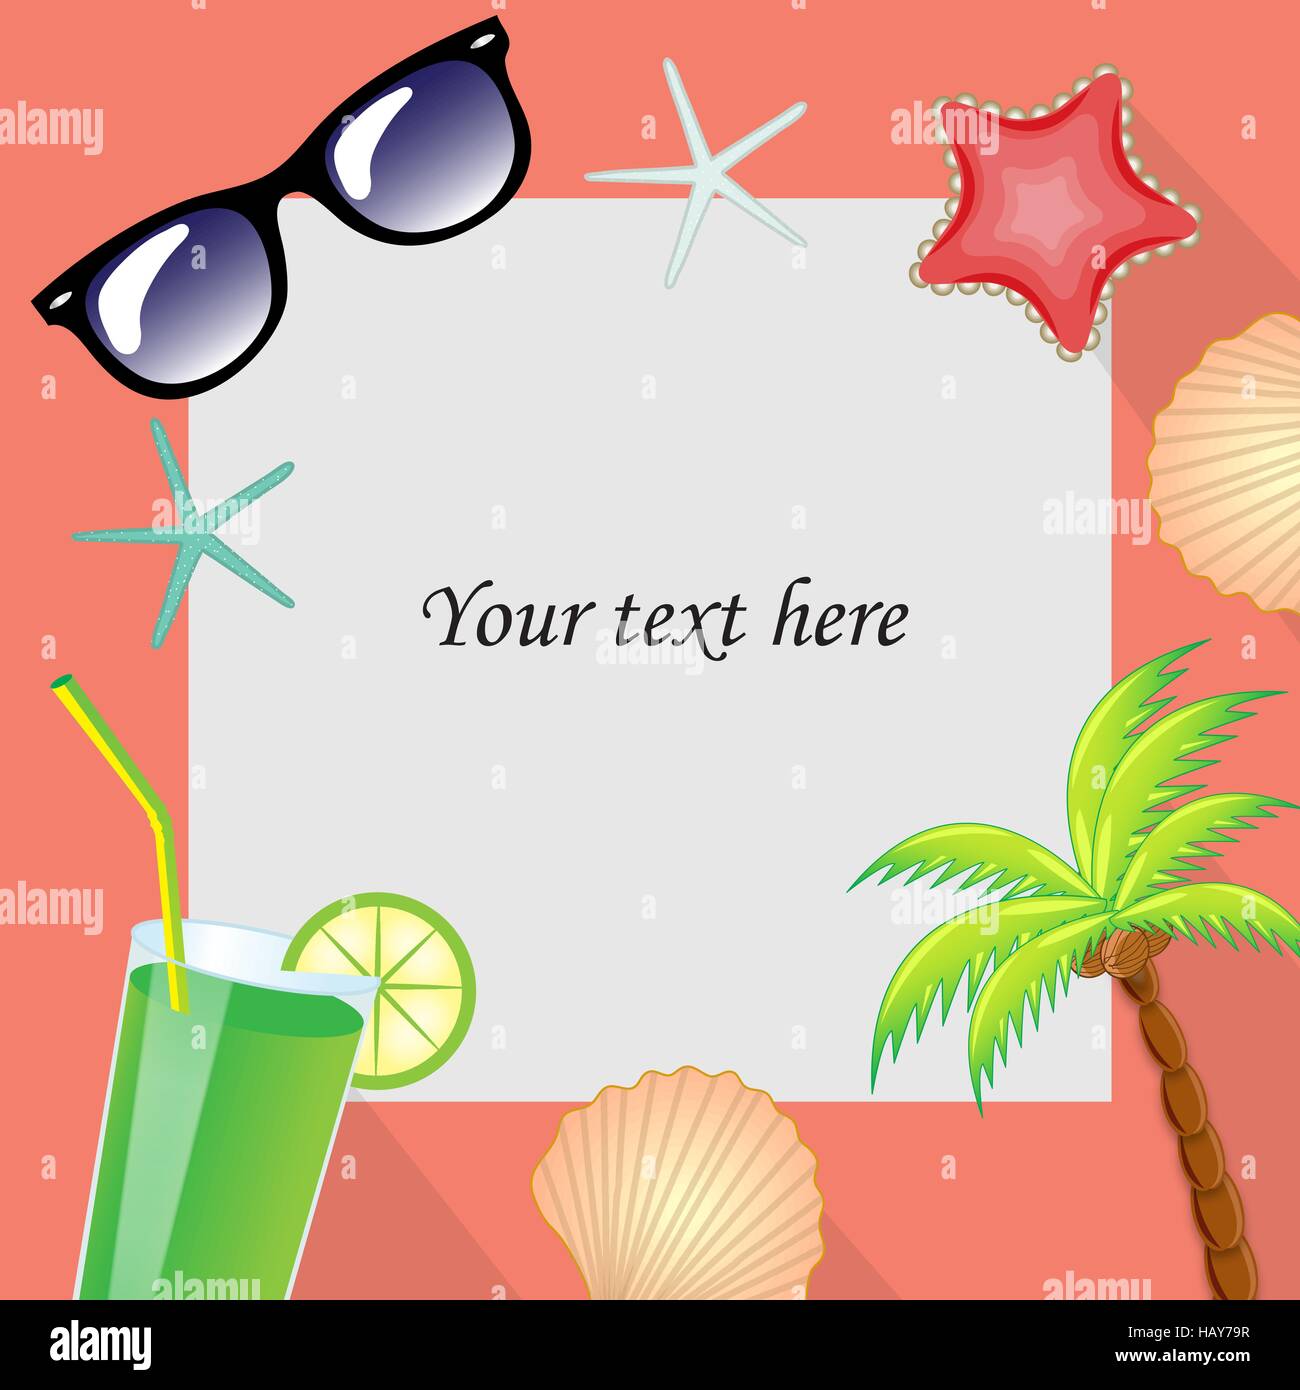 Summertime traveling template with beach summer accessories. Summer template for the text frame. vector illustration. Stock Vector